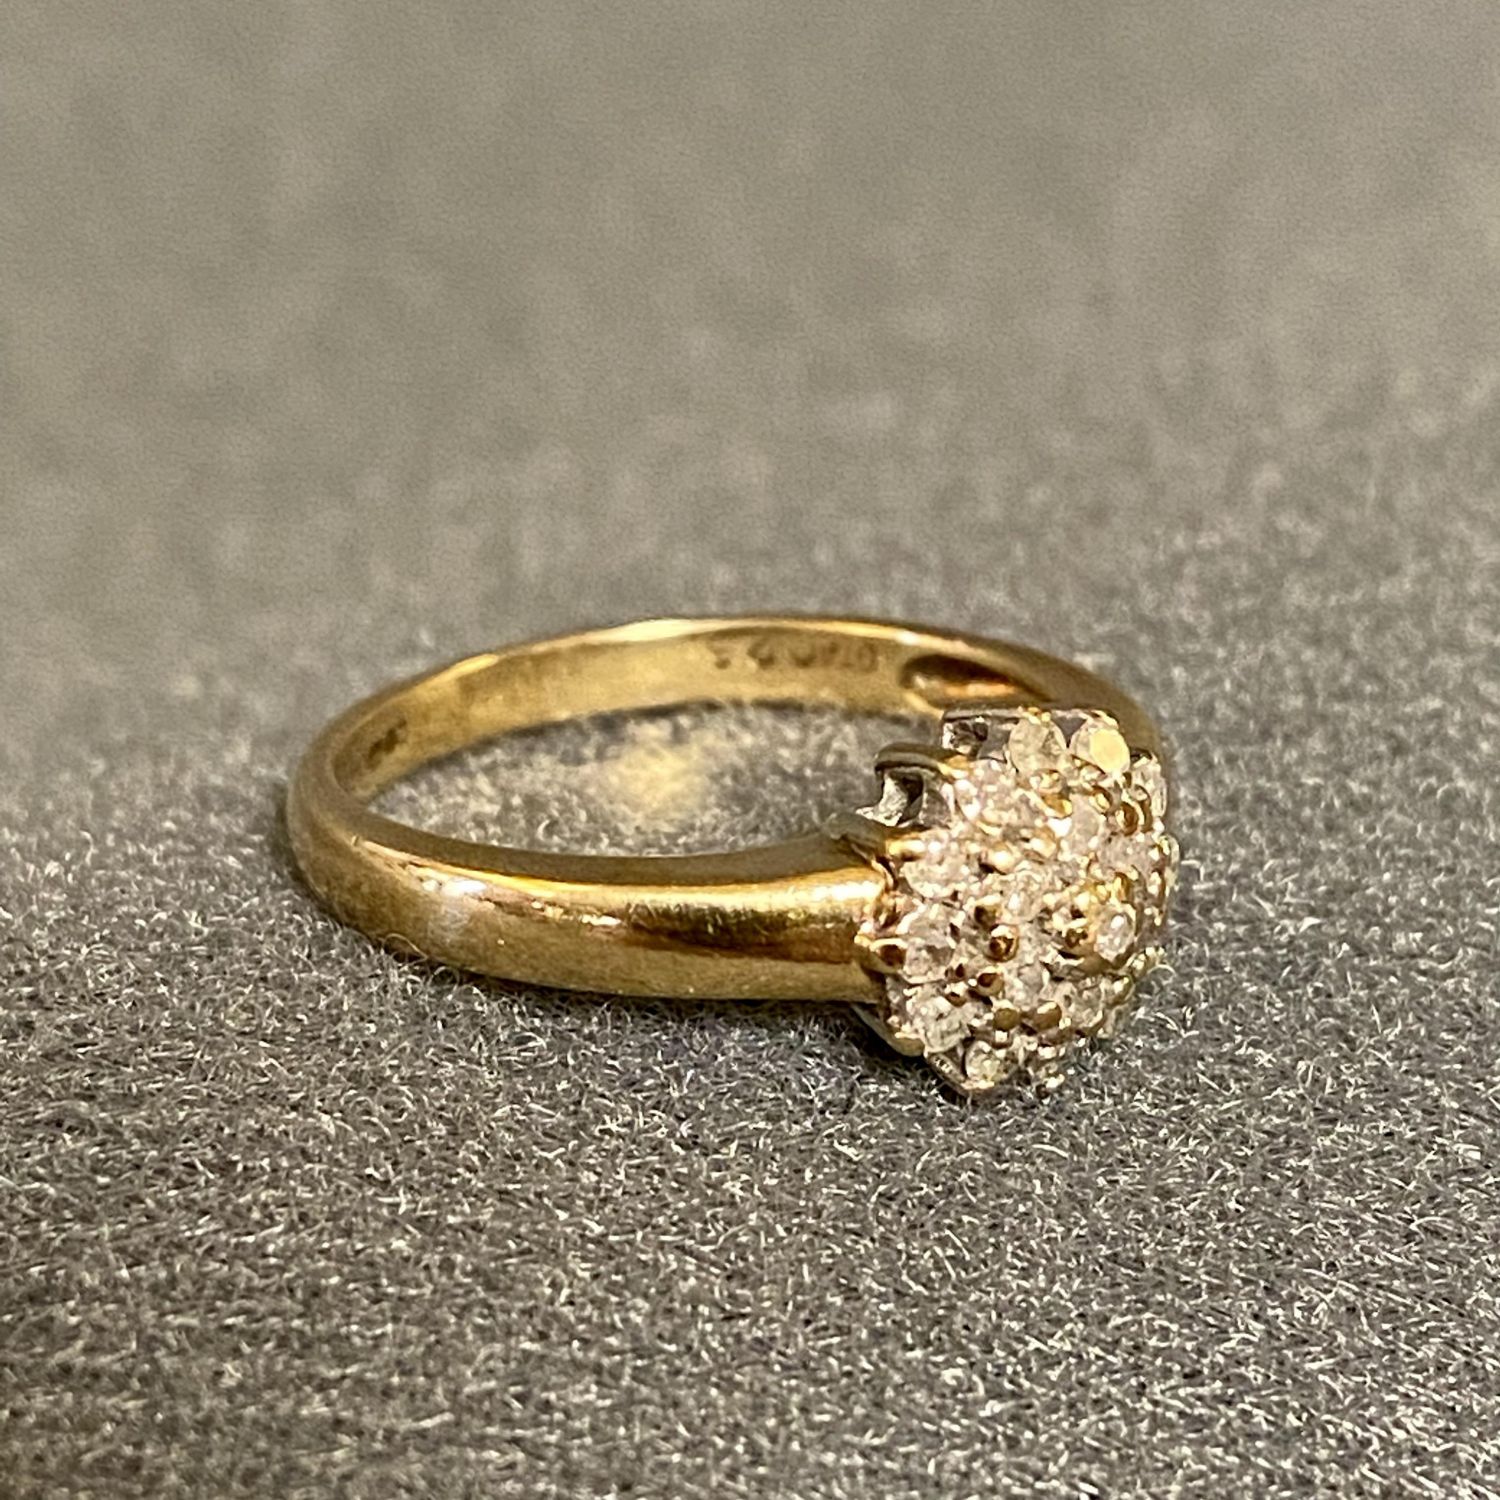 9ct Gold Diamond Cluster Ring - Jewellery & Gold - Hemswell Antique Centres